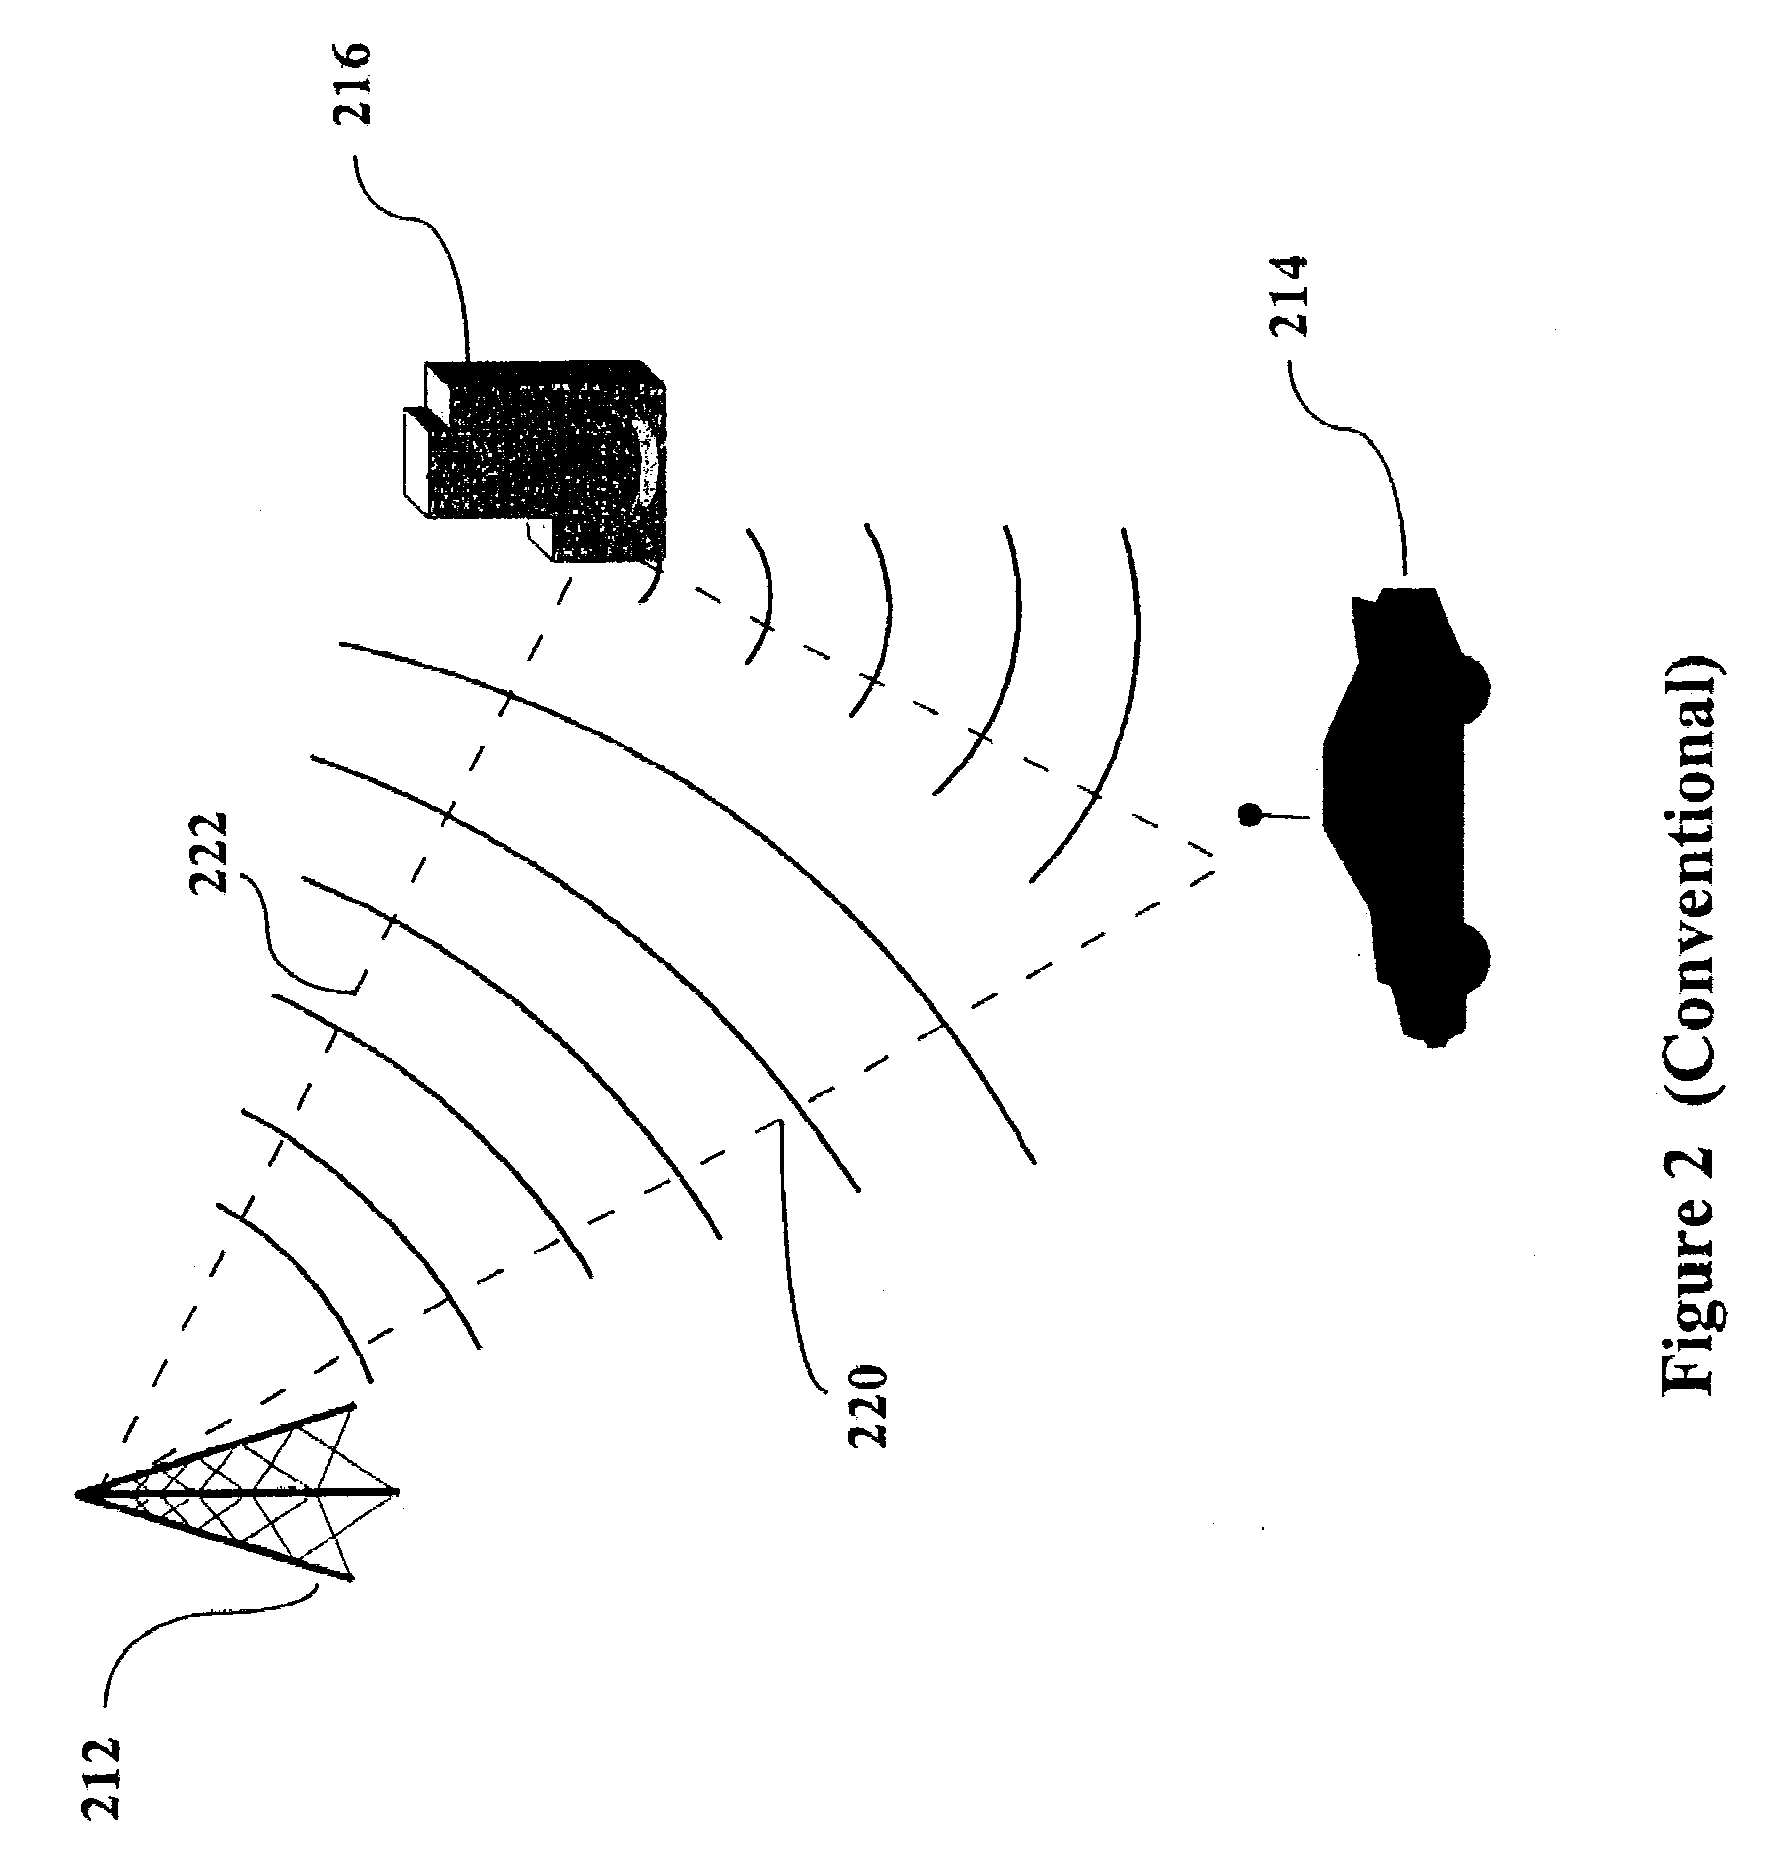 Dithering scheme using multiple antennas for OFDM systems